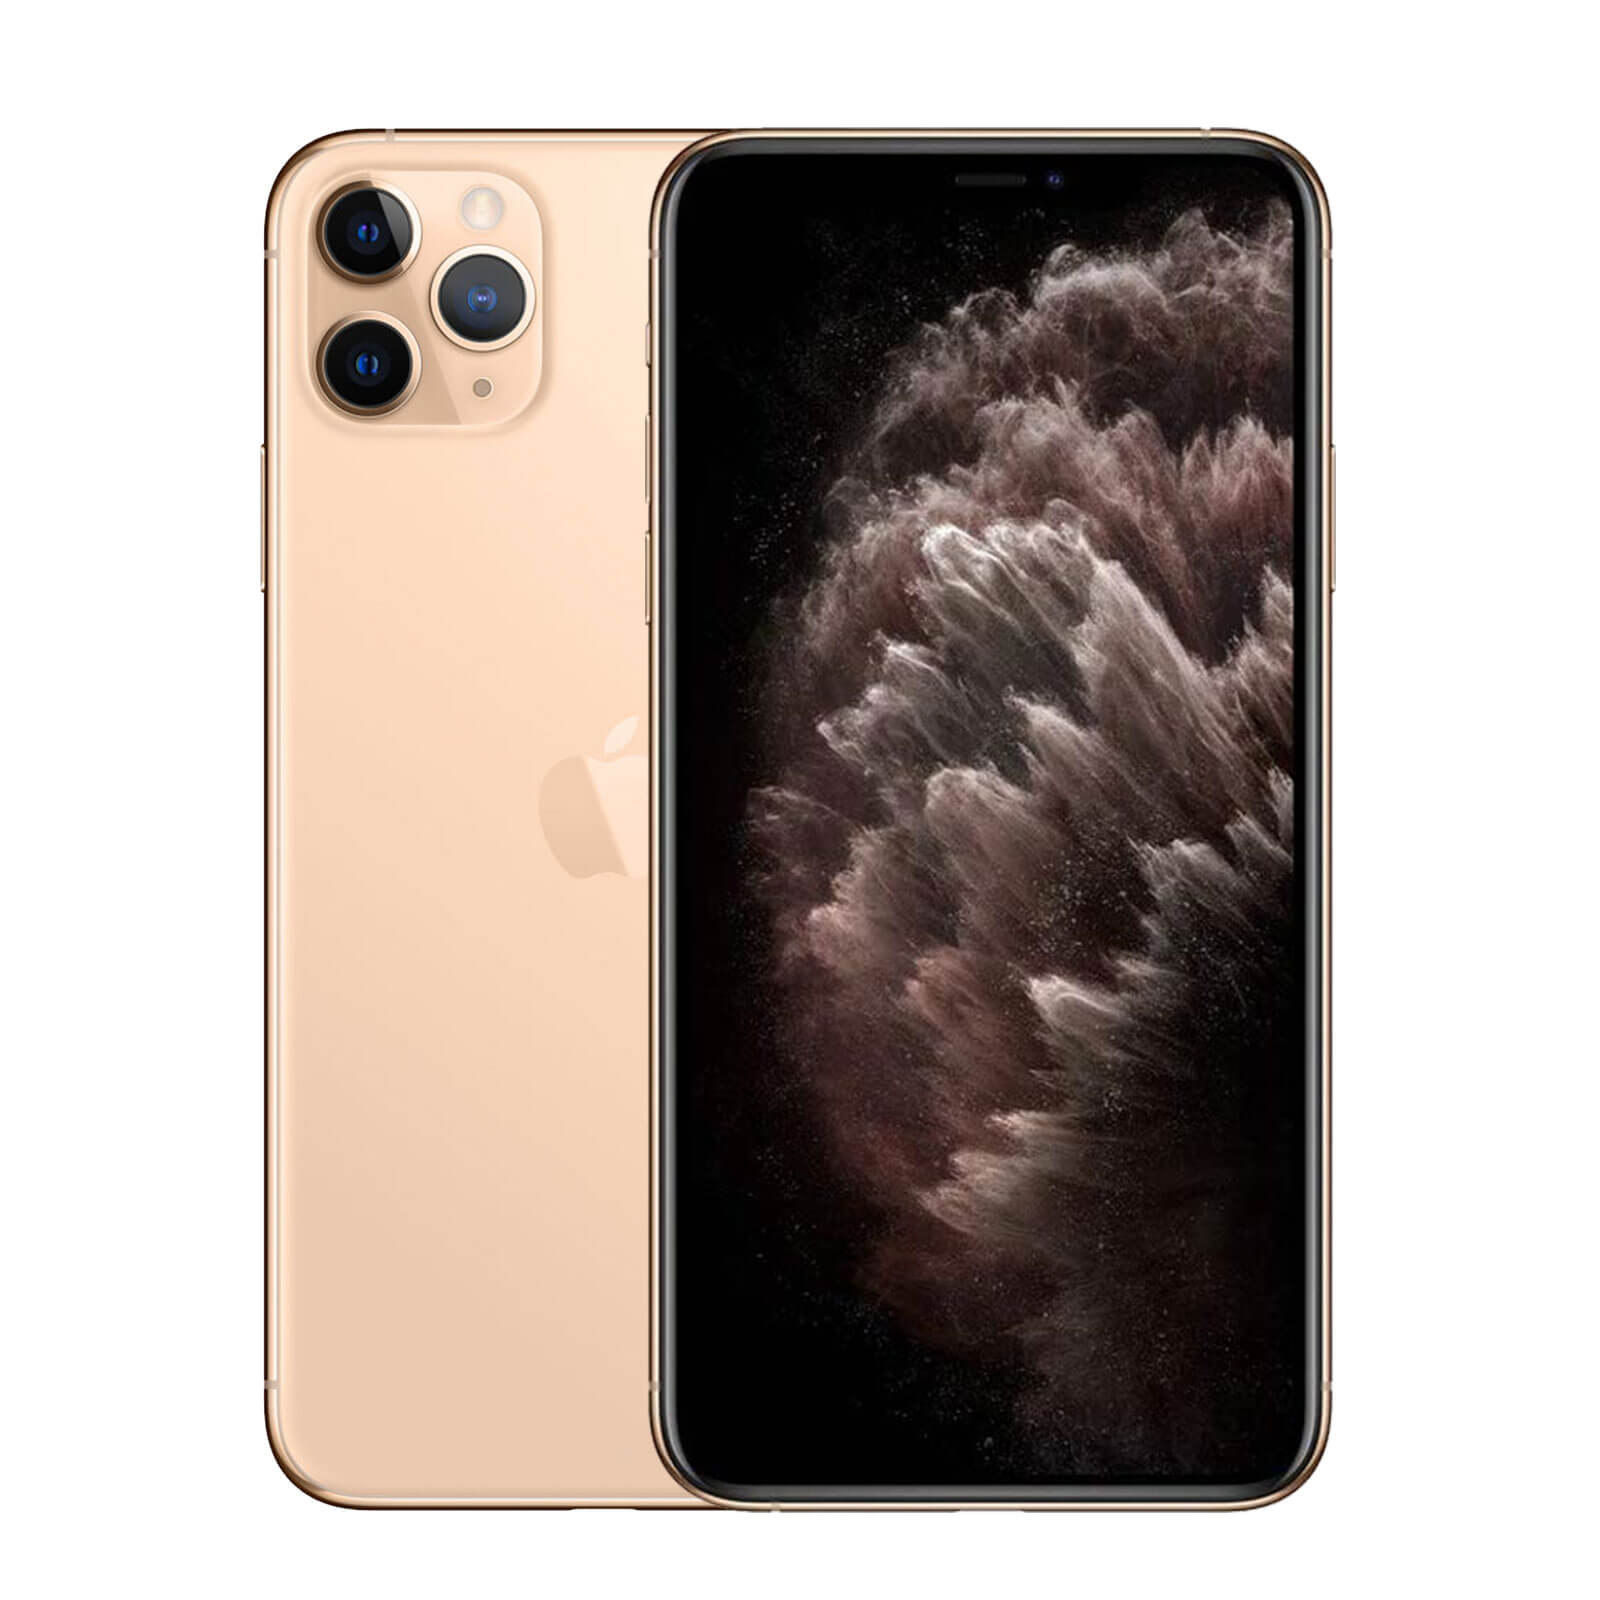 Apple iPhone 11 Pro 256GB Gold Very Good - T-Mobile